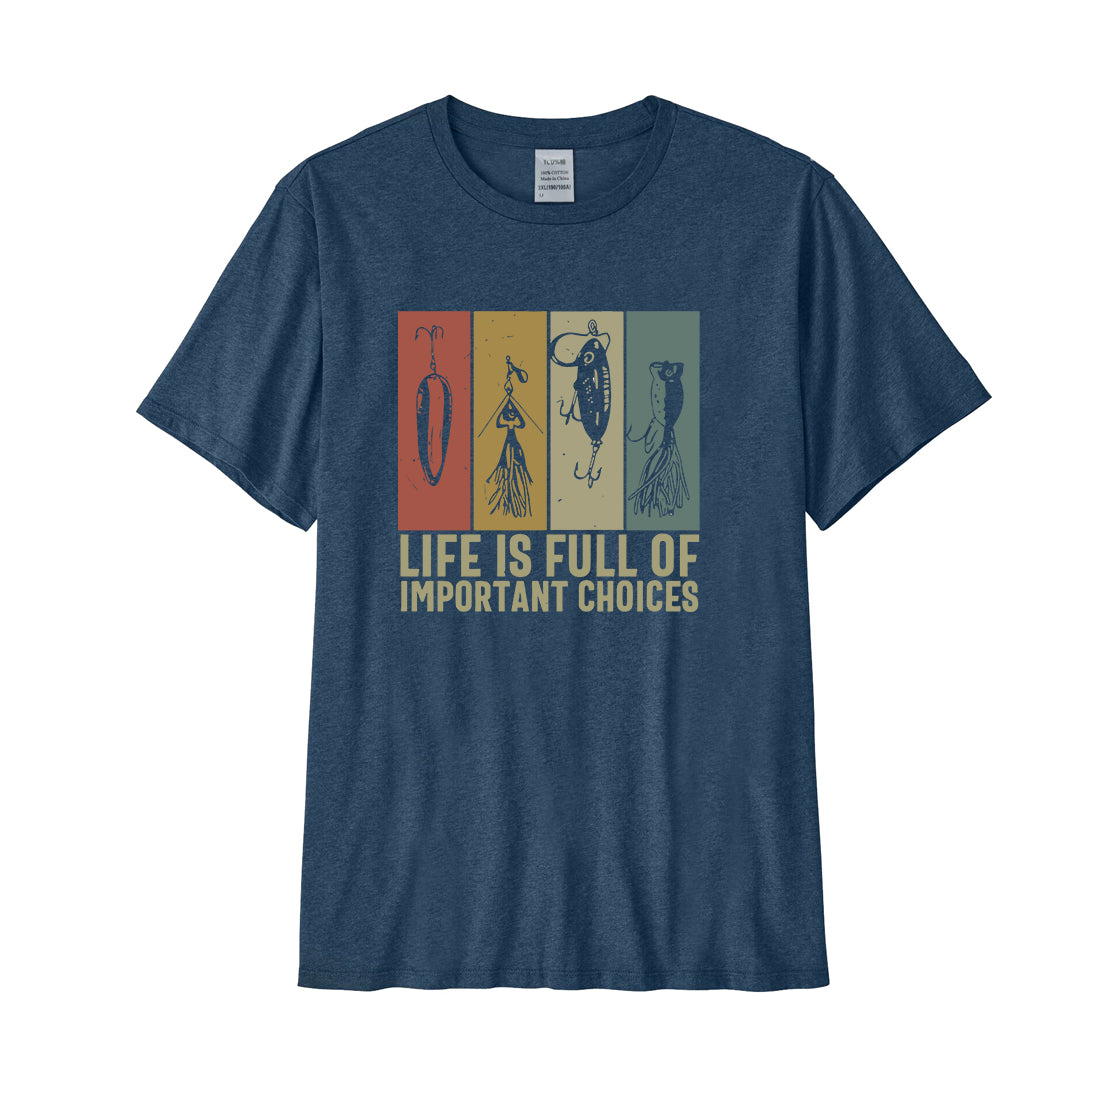 LIFE IS FULL OF IMPORTANT CHOICES Performance T-Shirt